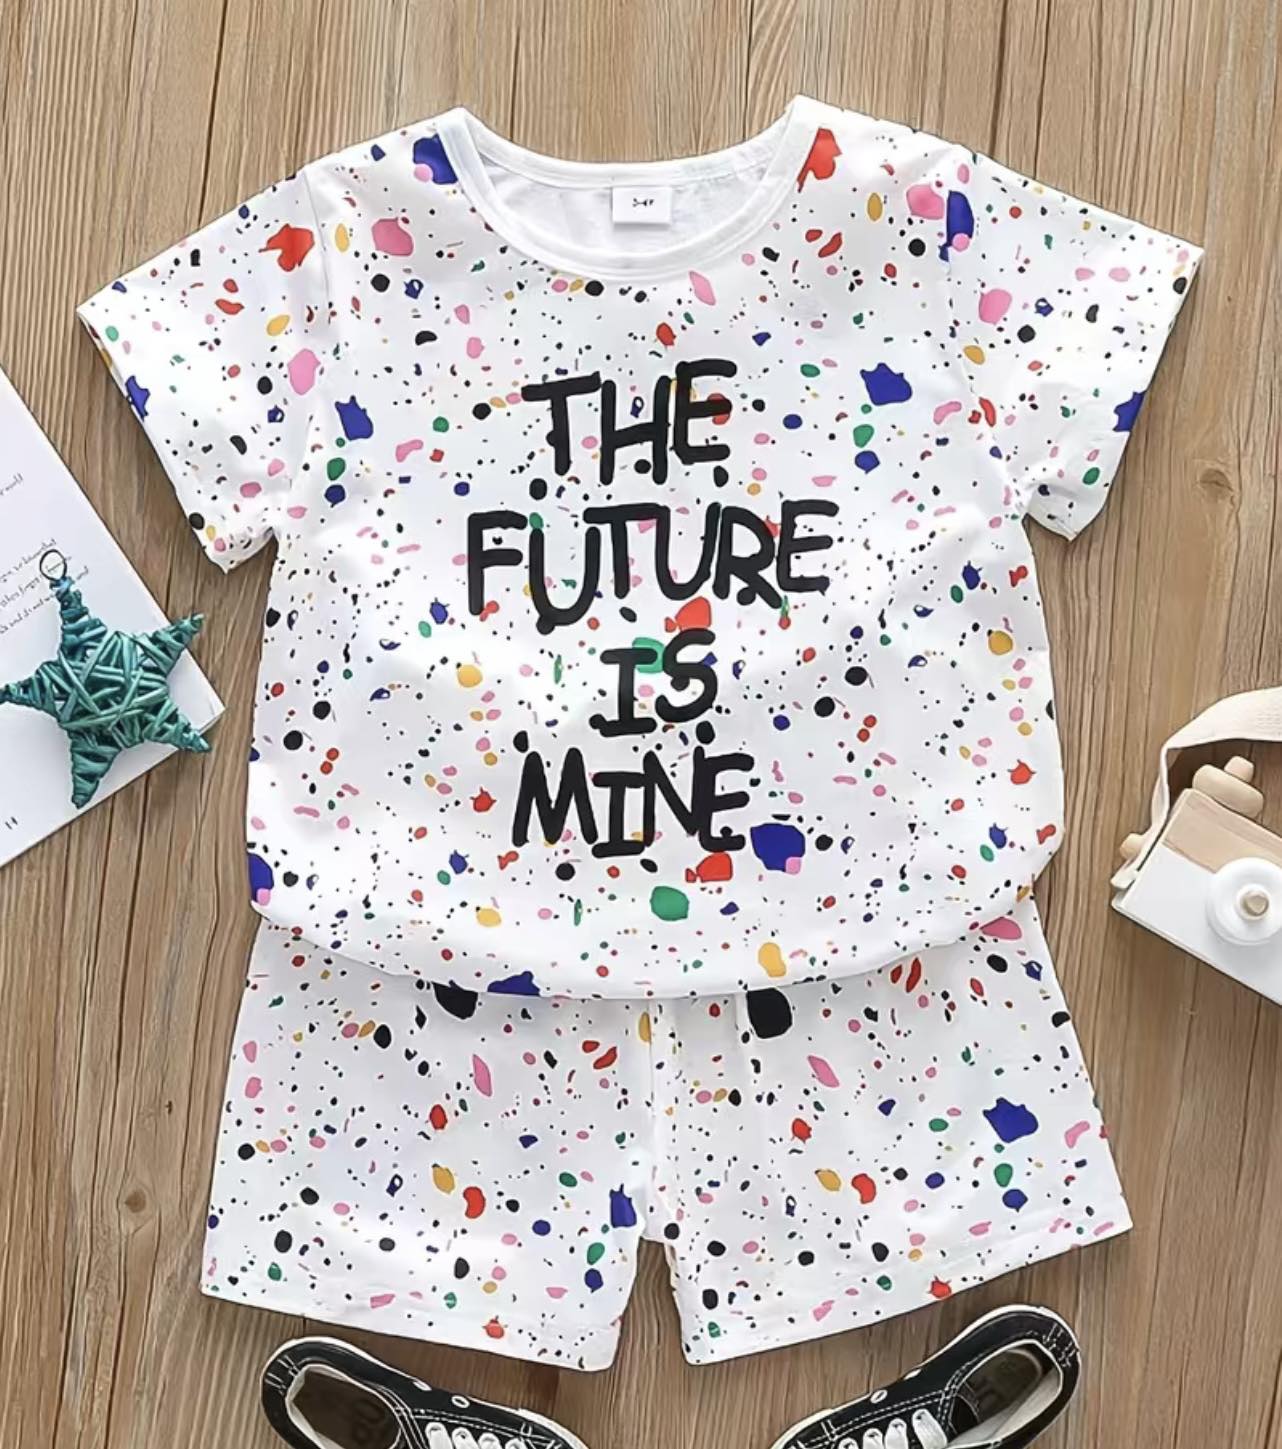 Boy's The Future is Mine Outfit